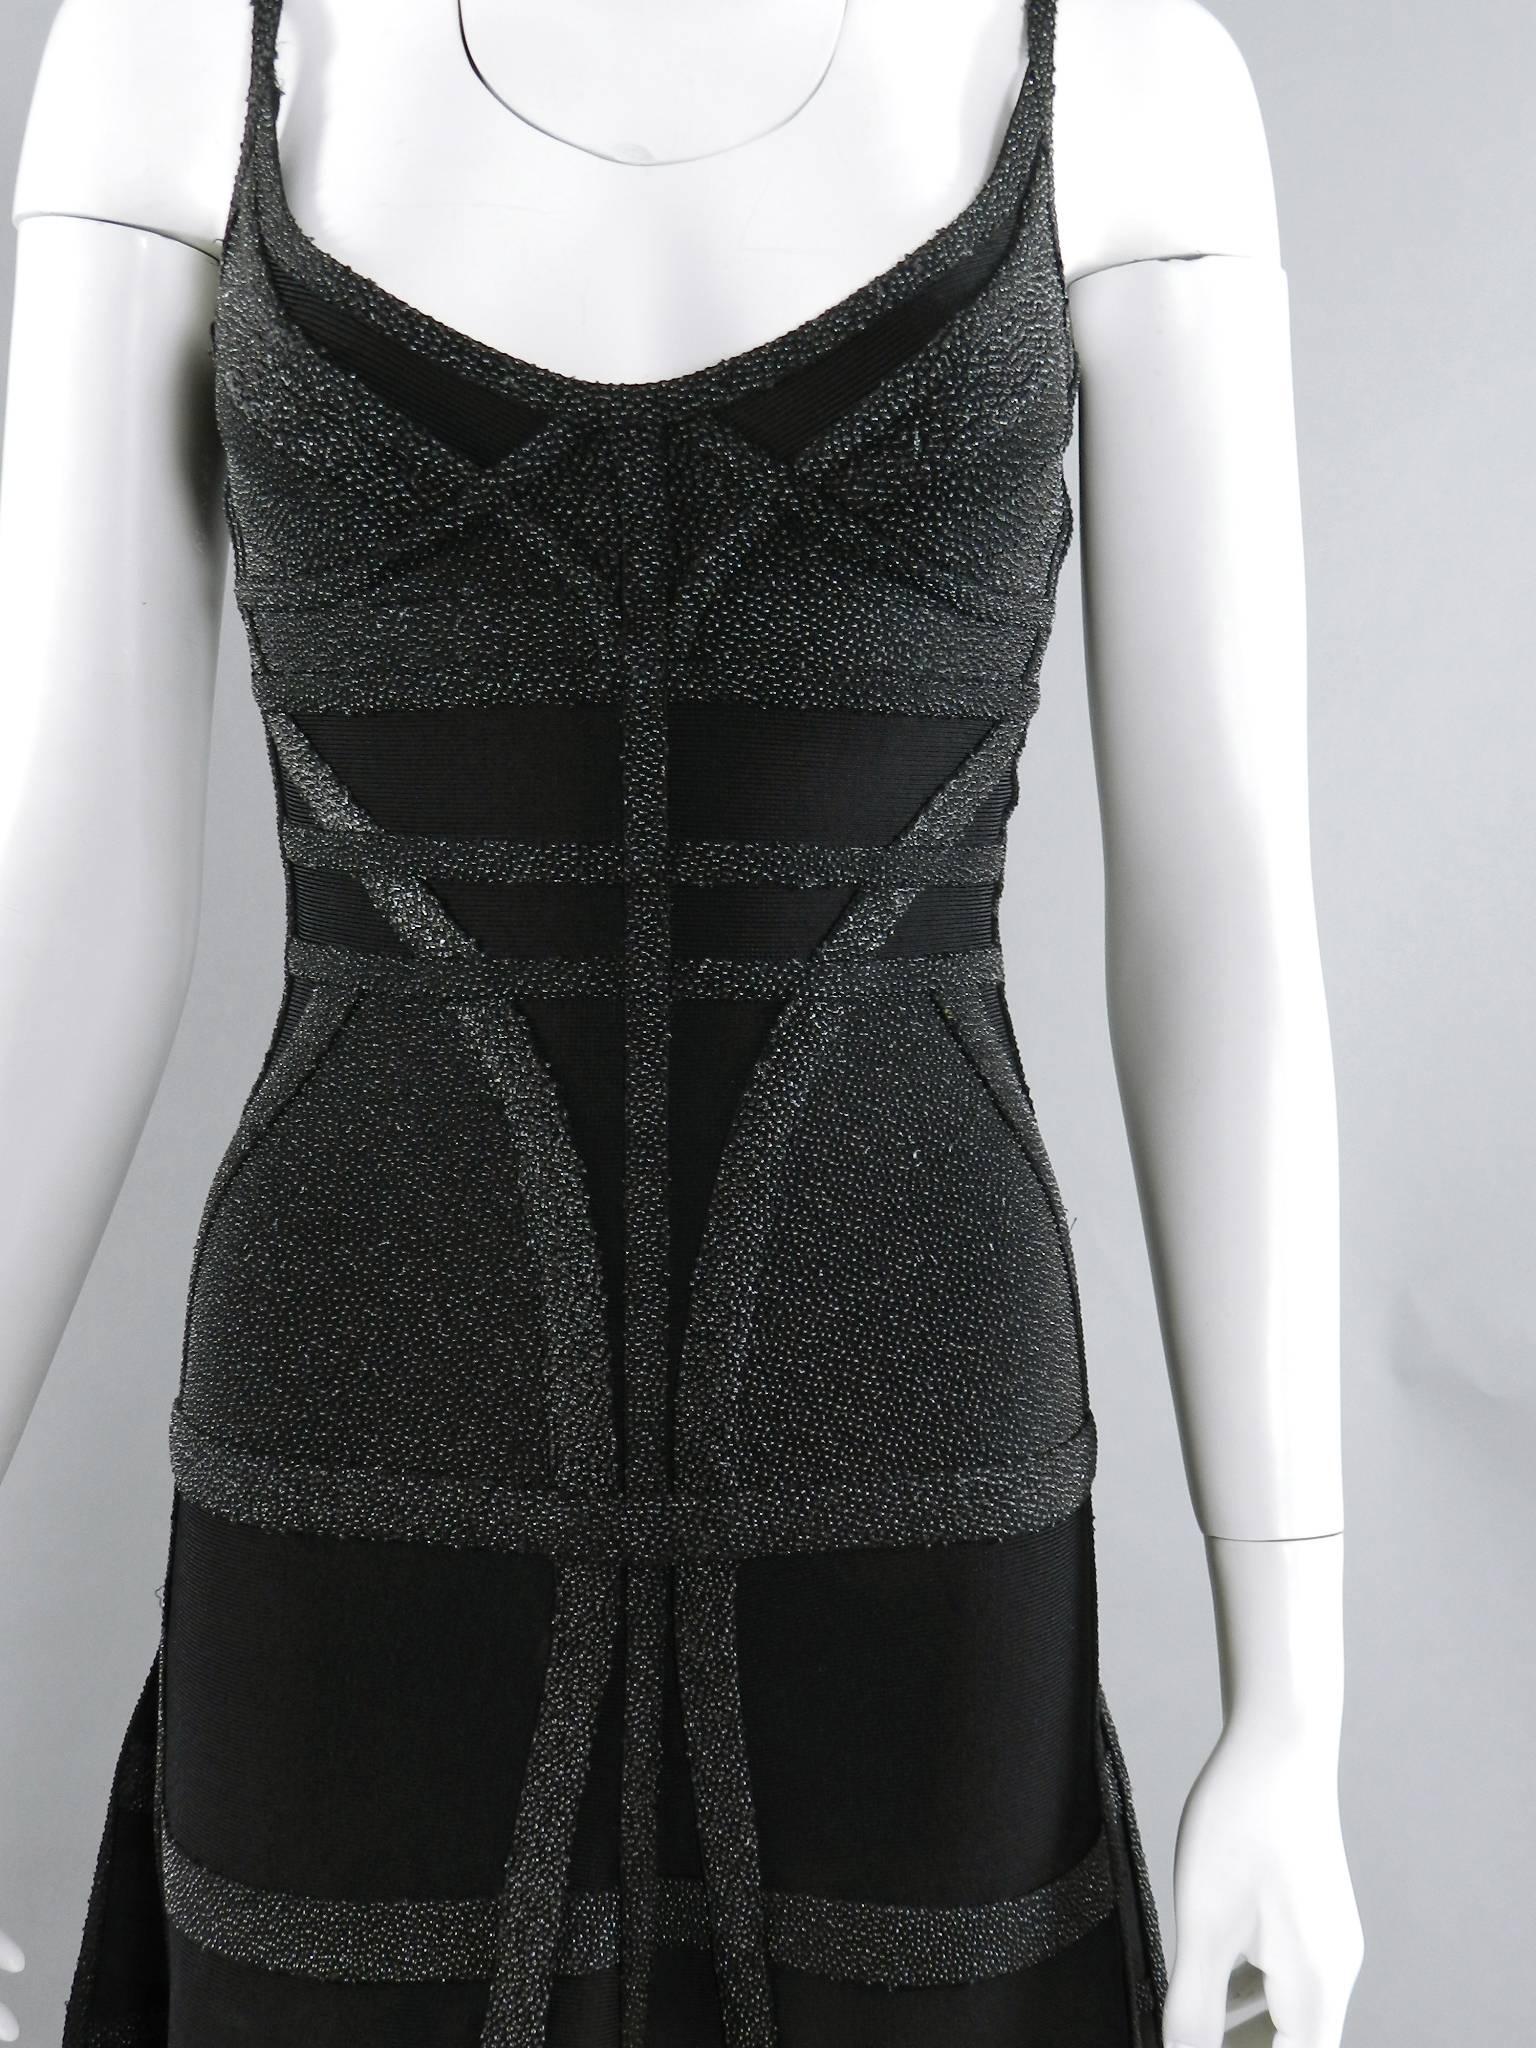 Herve Leger Black Strappy Fit and Flare Dress 1